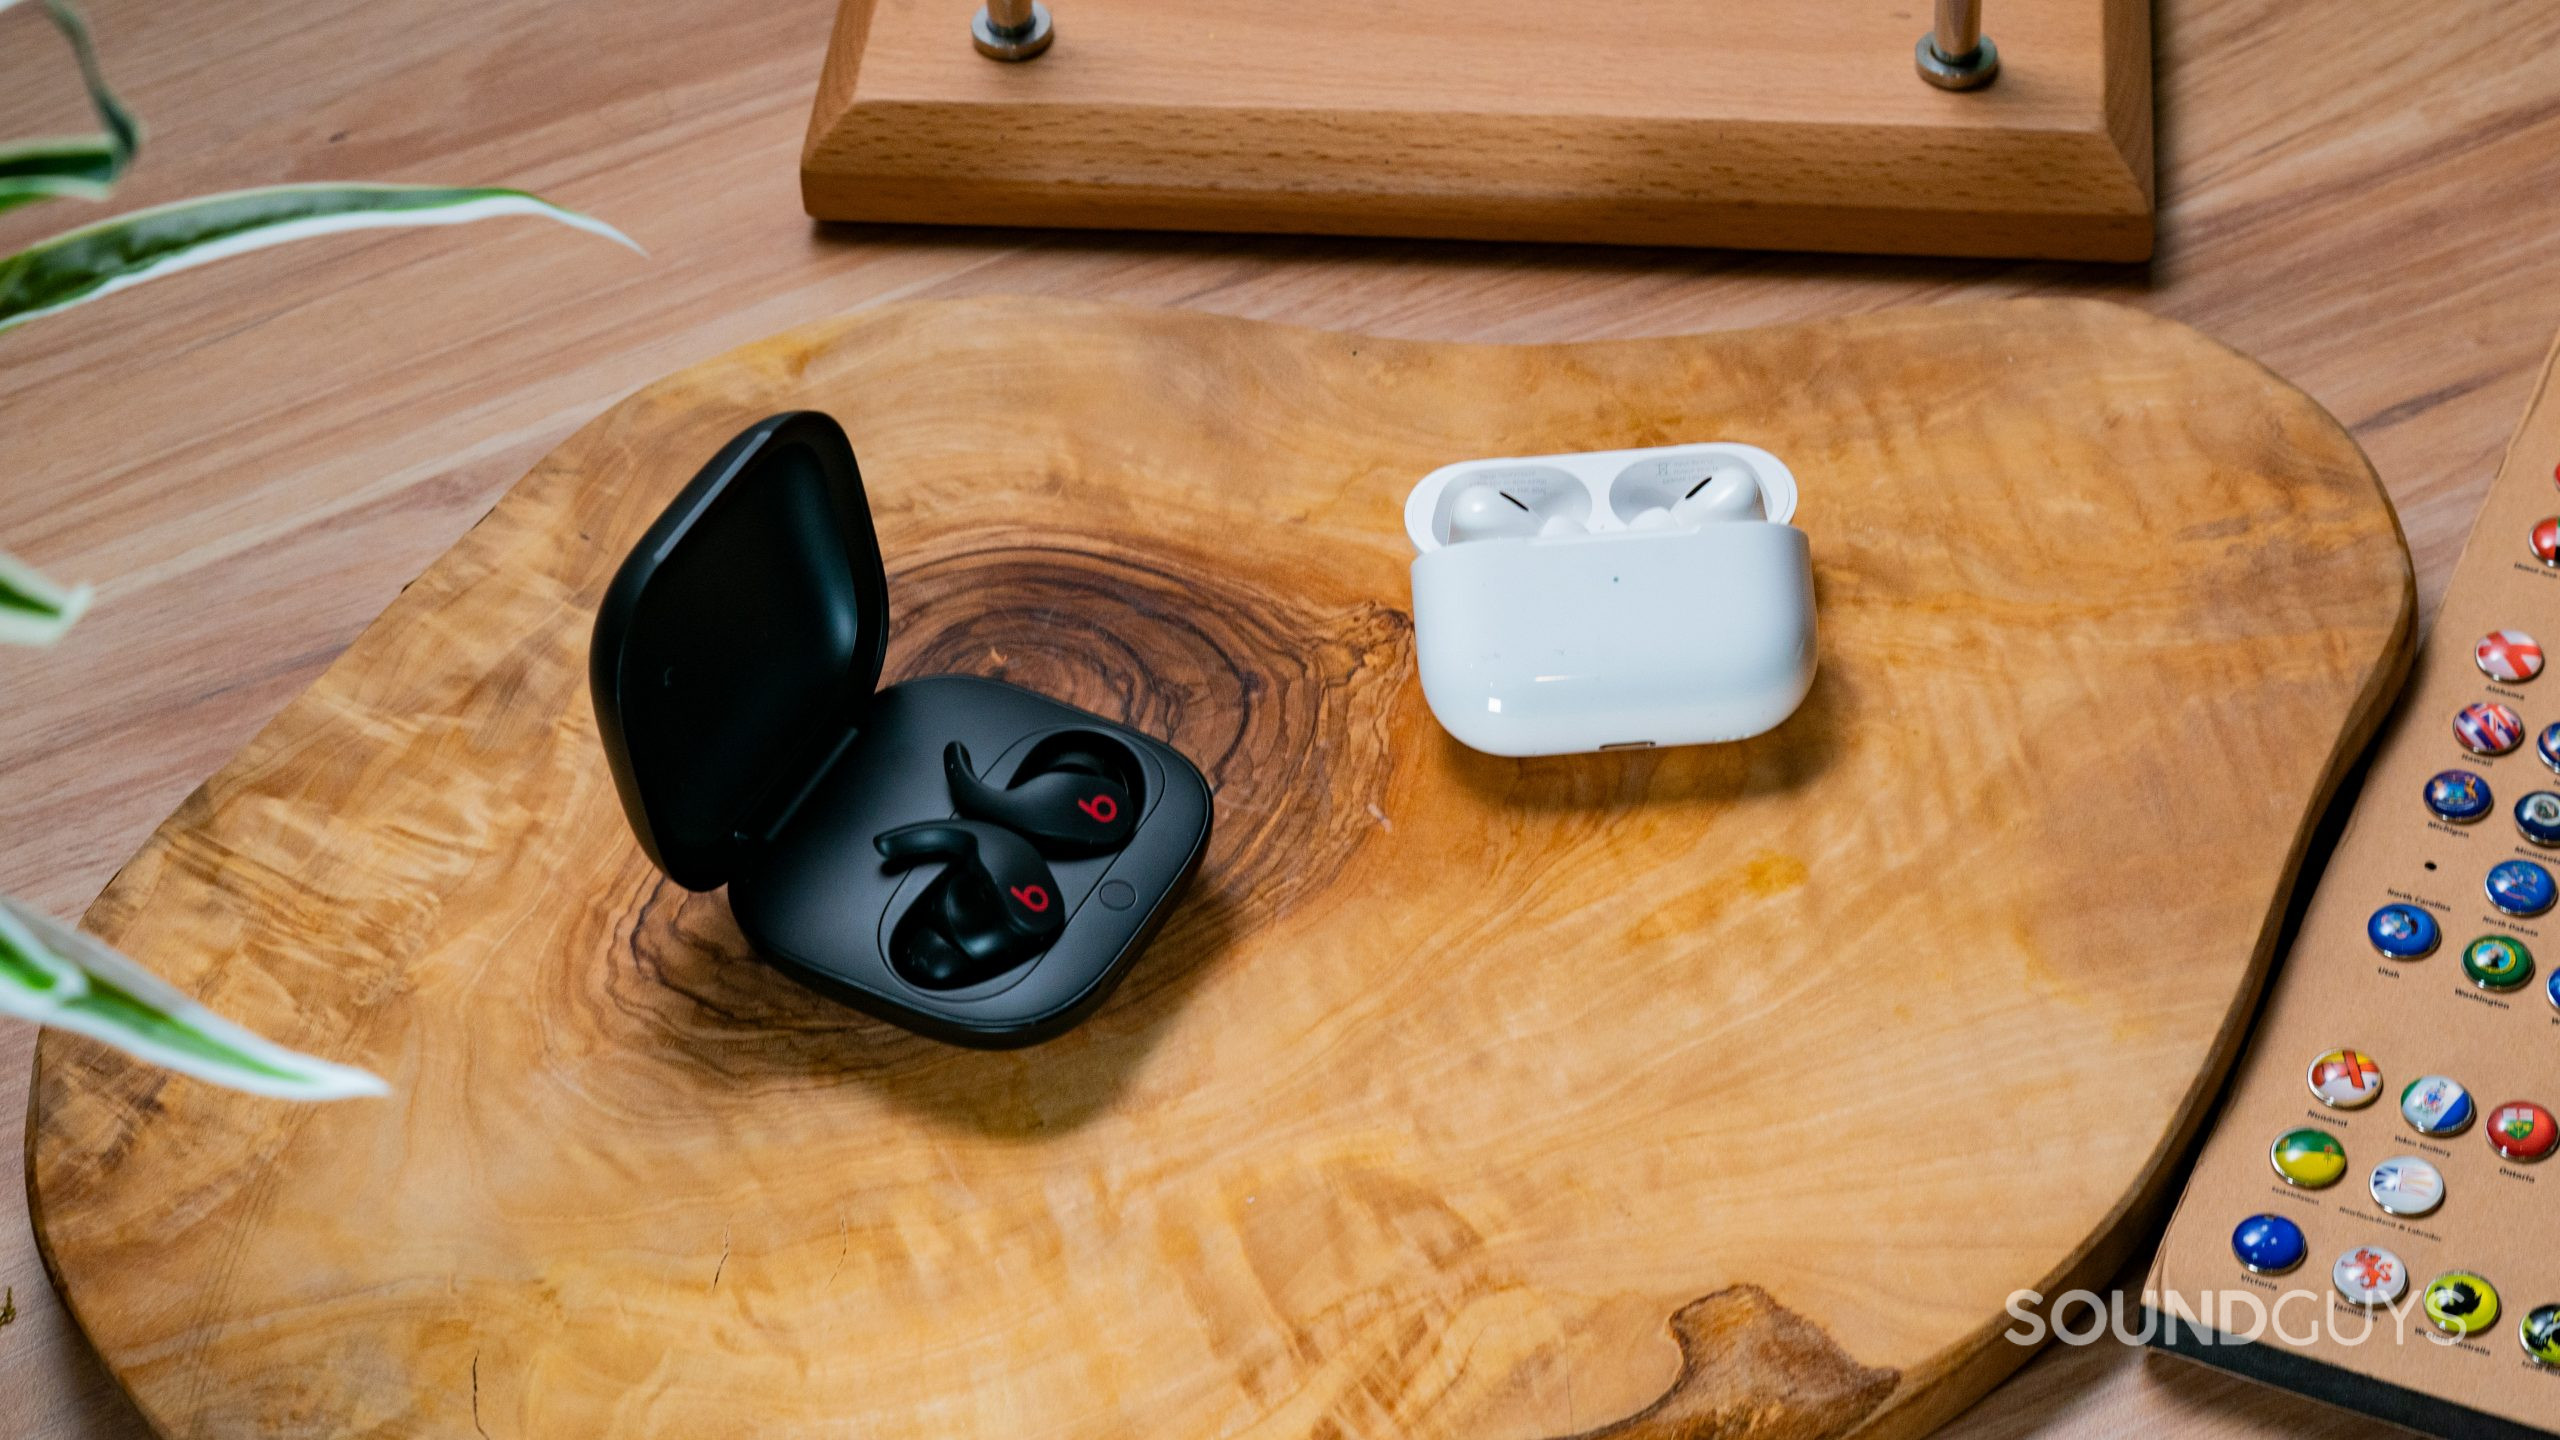 The Beats Fit Pro and Apple AirPods Pro (2nd generation) next to each other in open cases on a wooden surface.